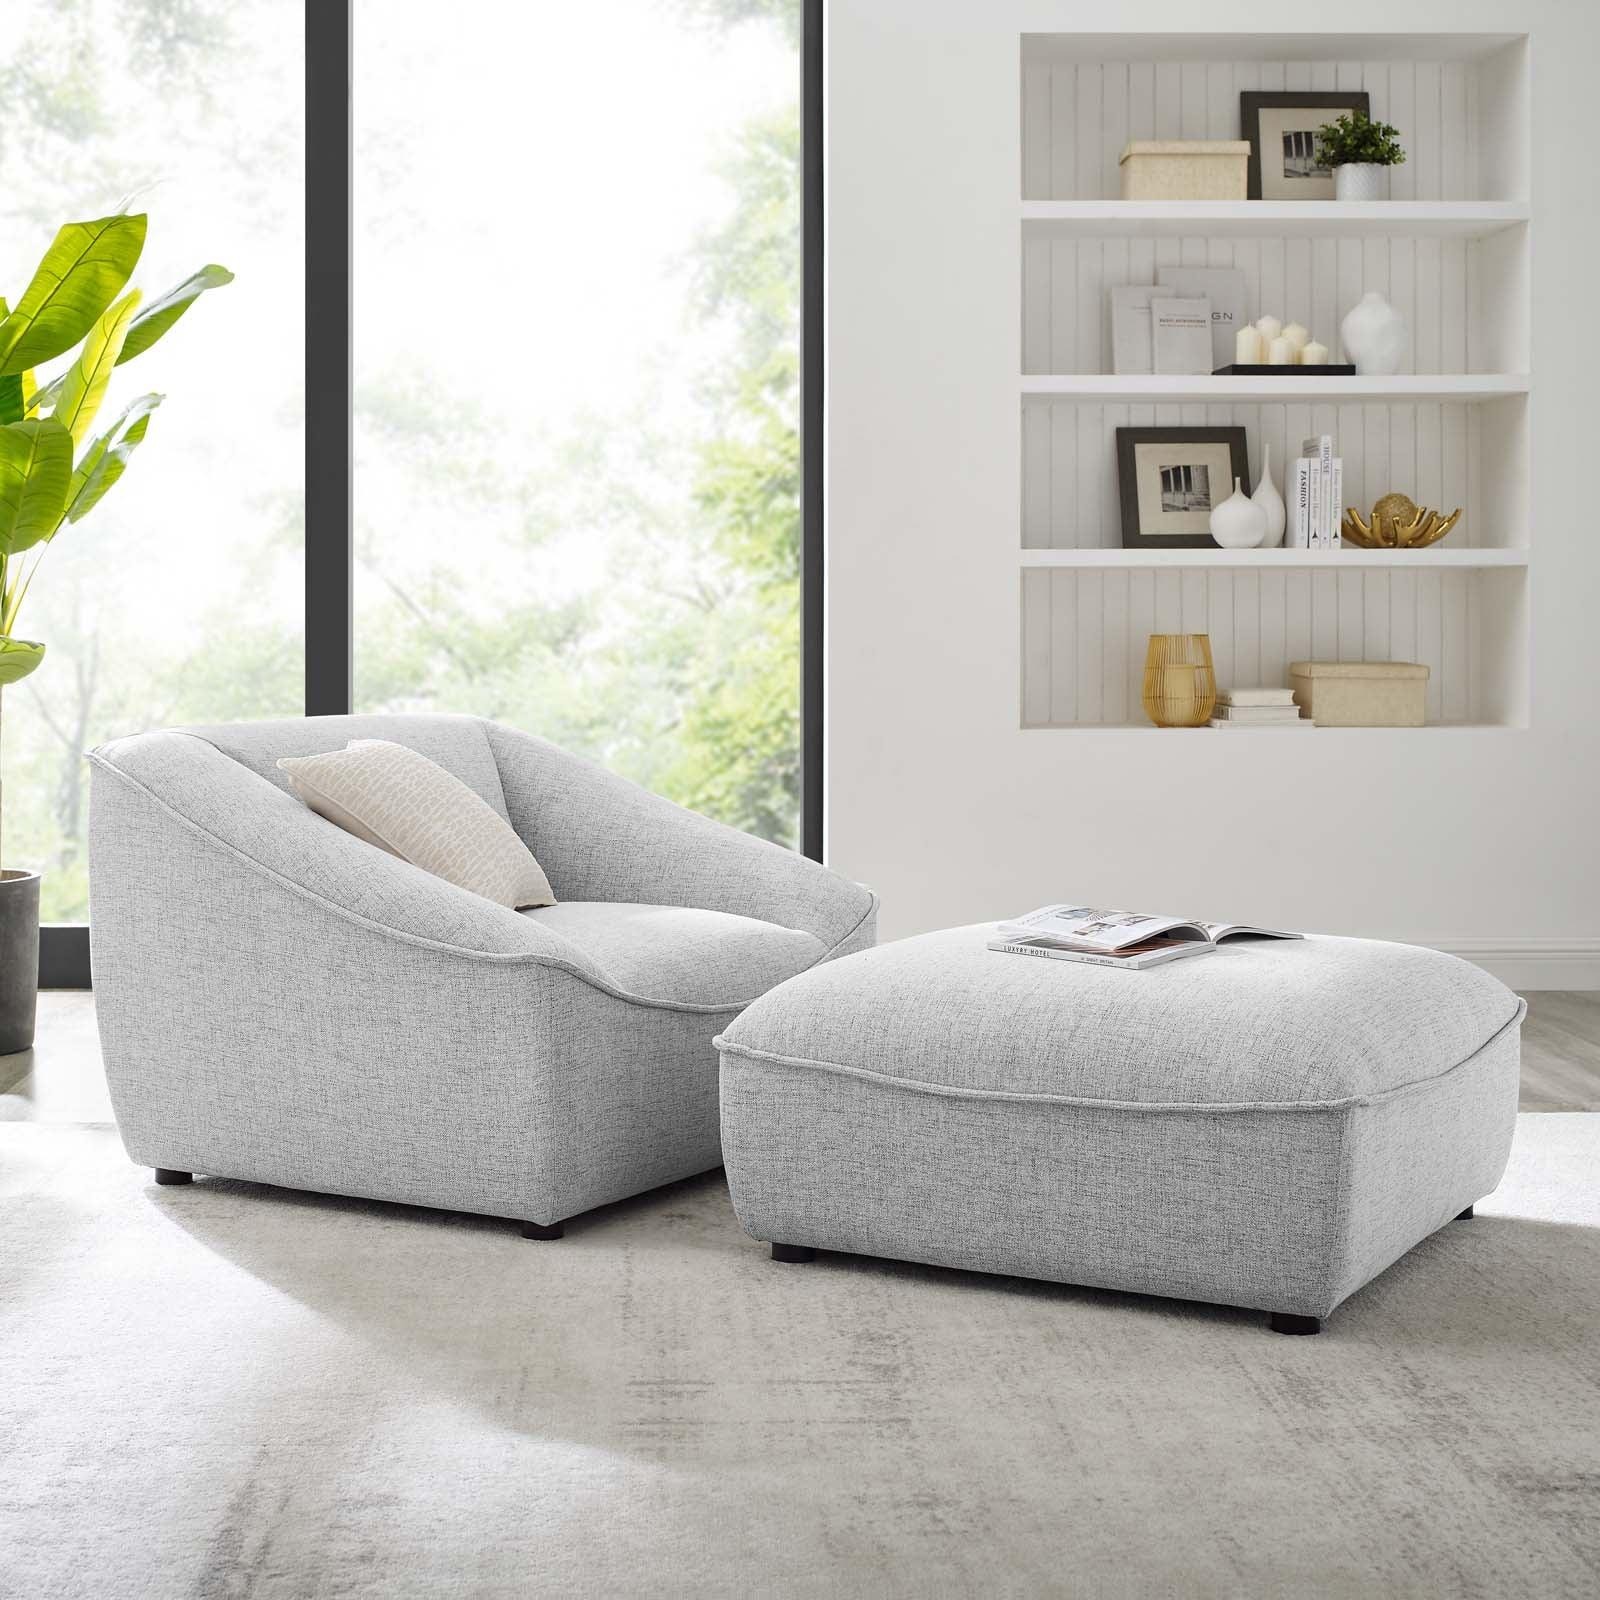  Cozy Comfort: Comprise Upholstered Armchair and Ottoman Set by Azilure